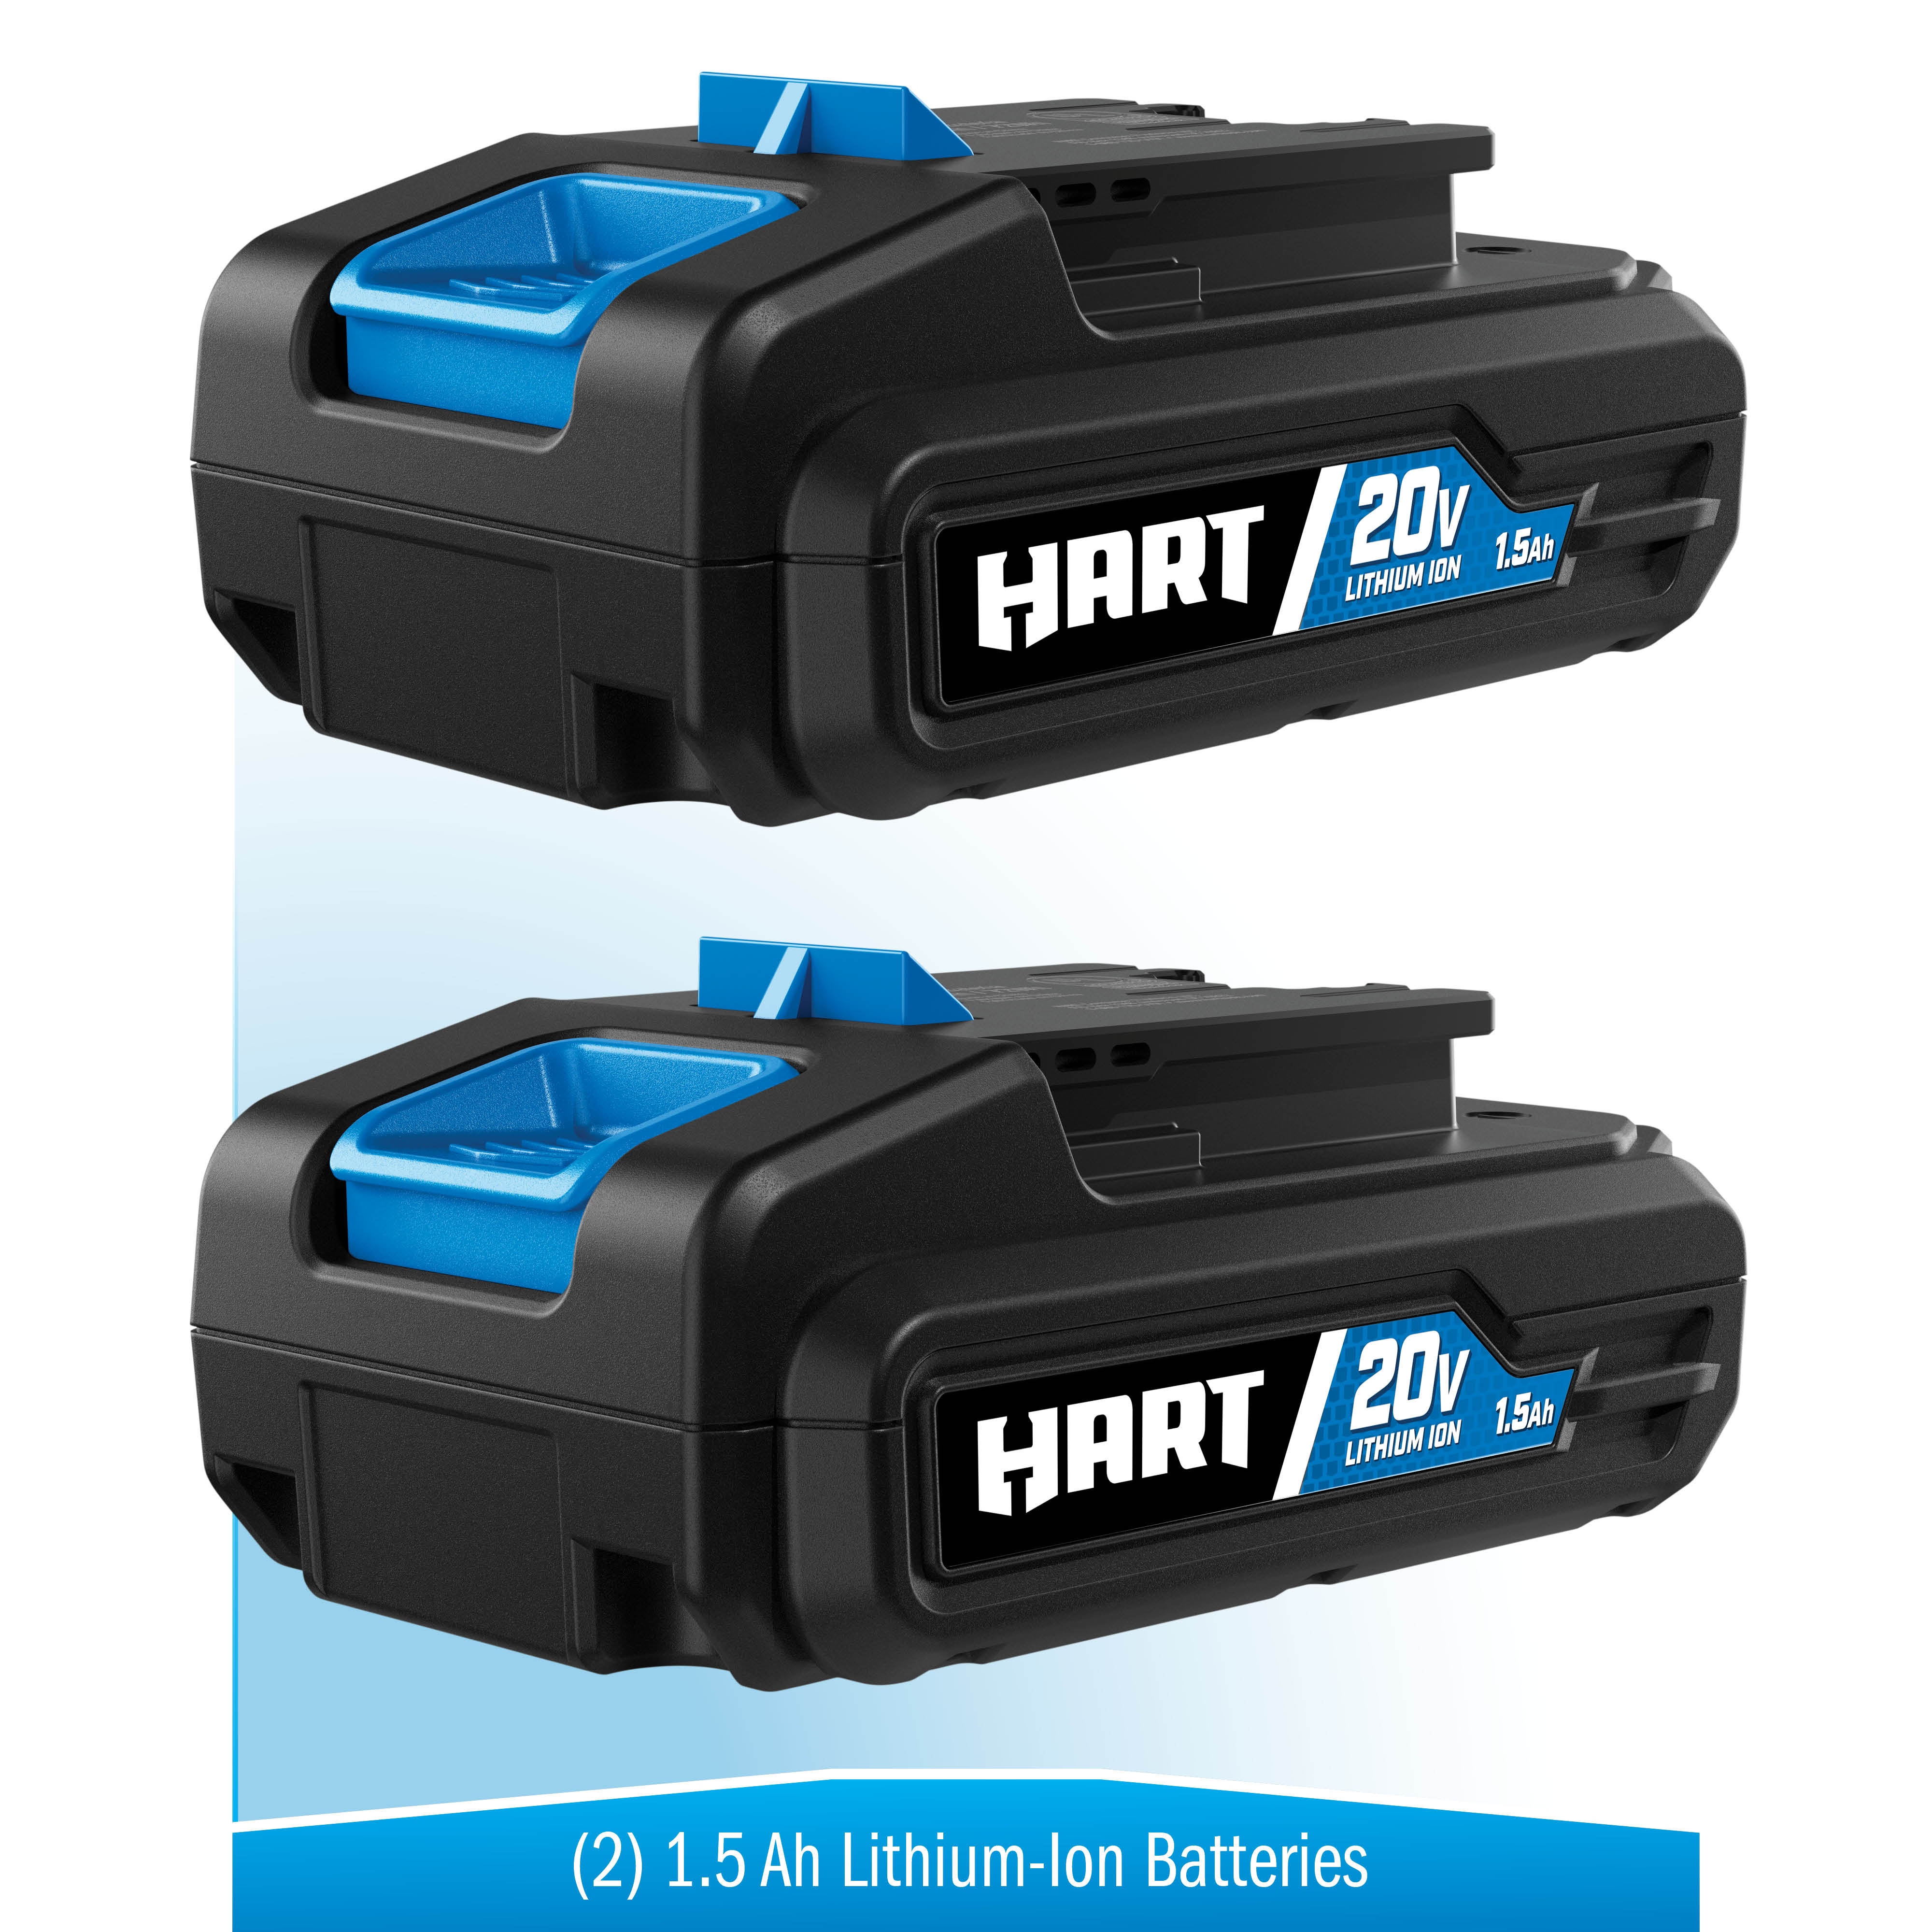 HART 20-Volt 4-Tool Battery-Powered Combo Kit, (2) 1.5Ah Lithium-Ion Batteries - image 16 of 23